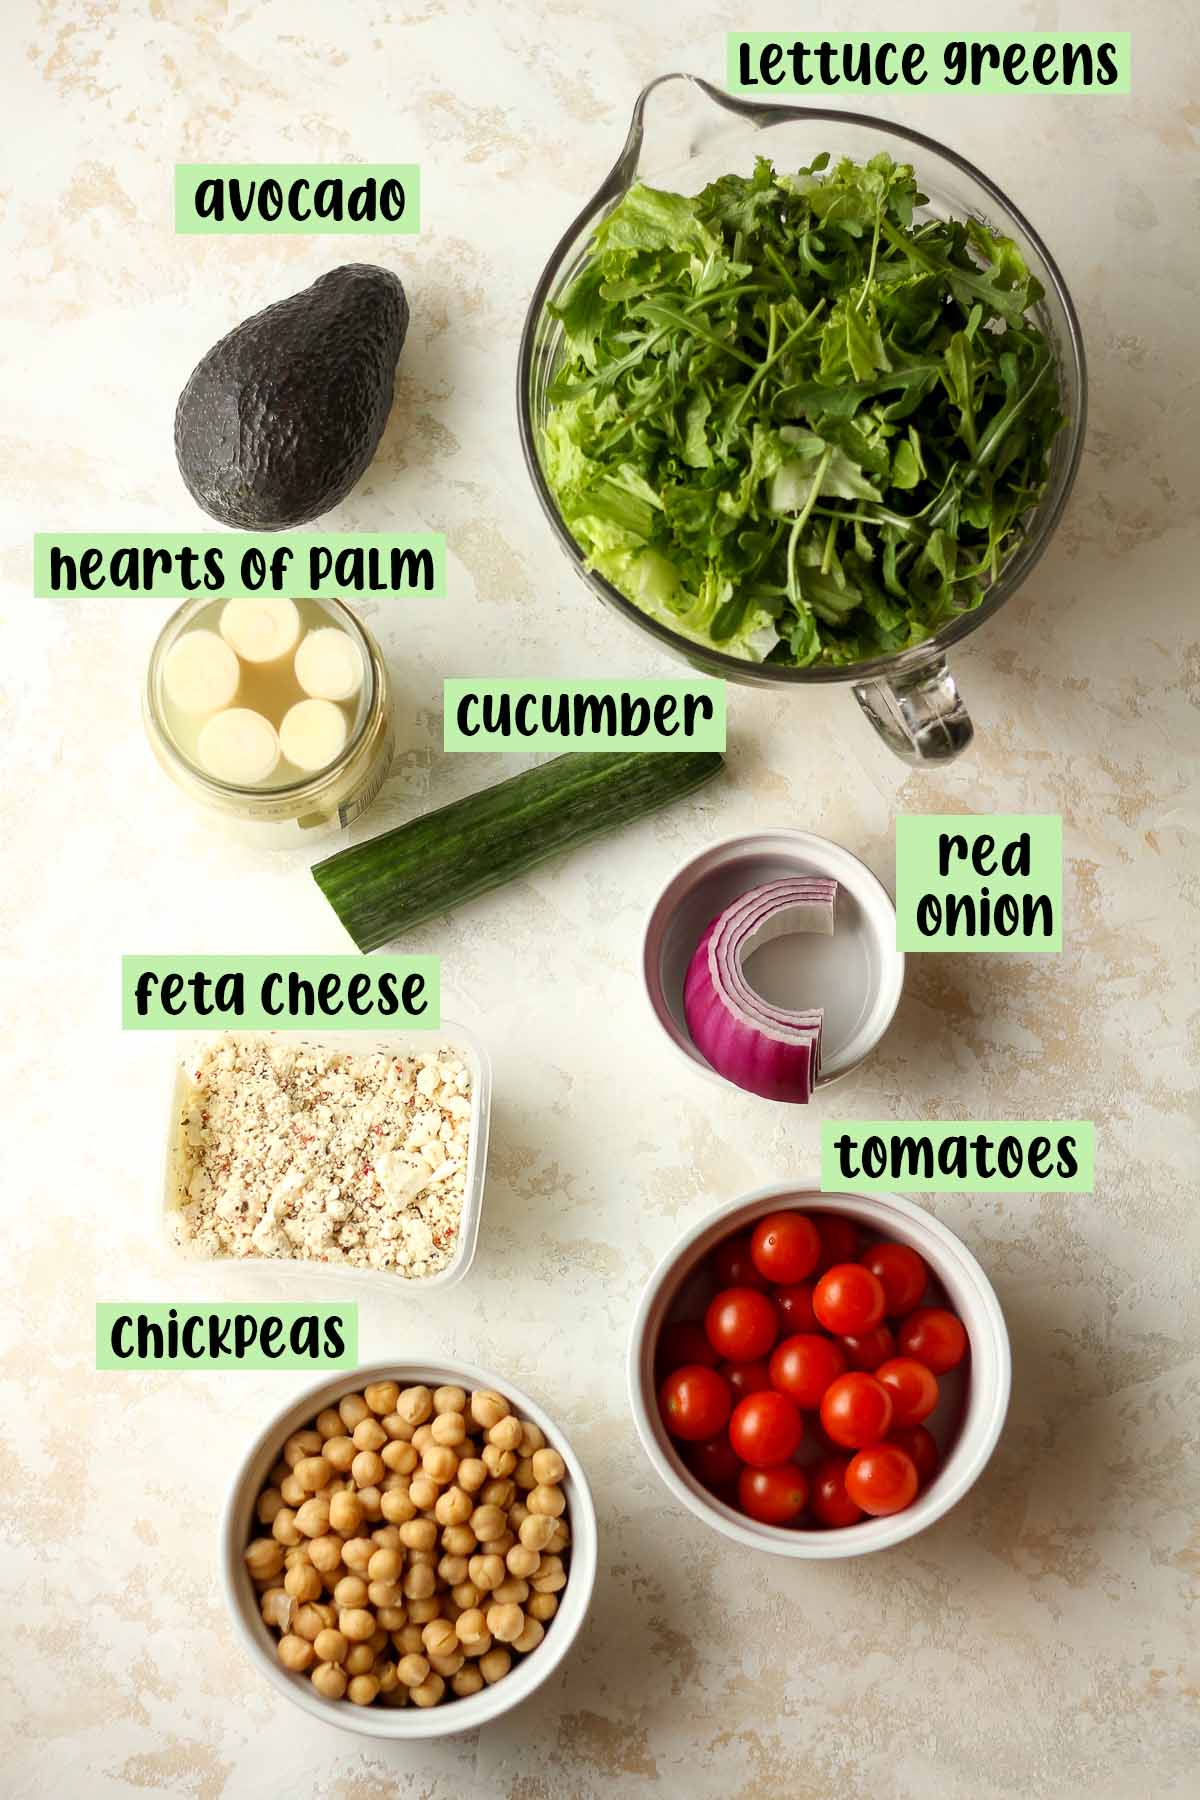 Labeled ingredients for hearts of palm salad.